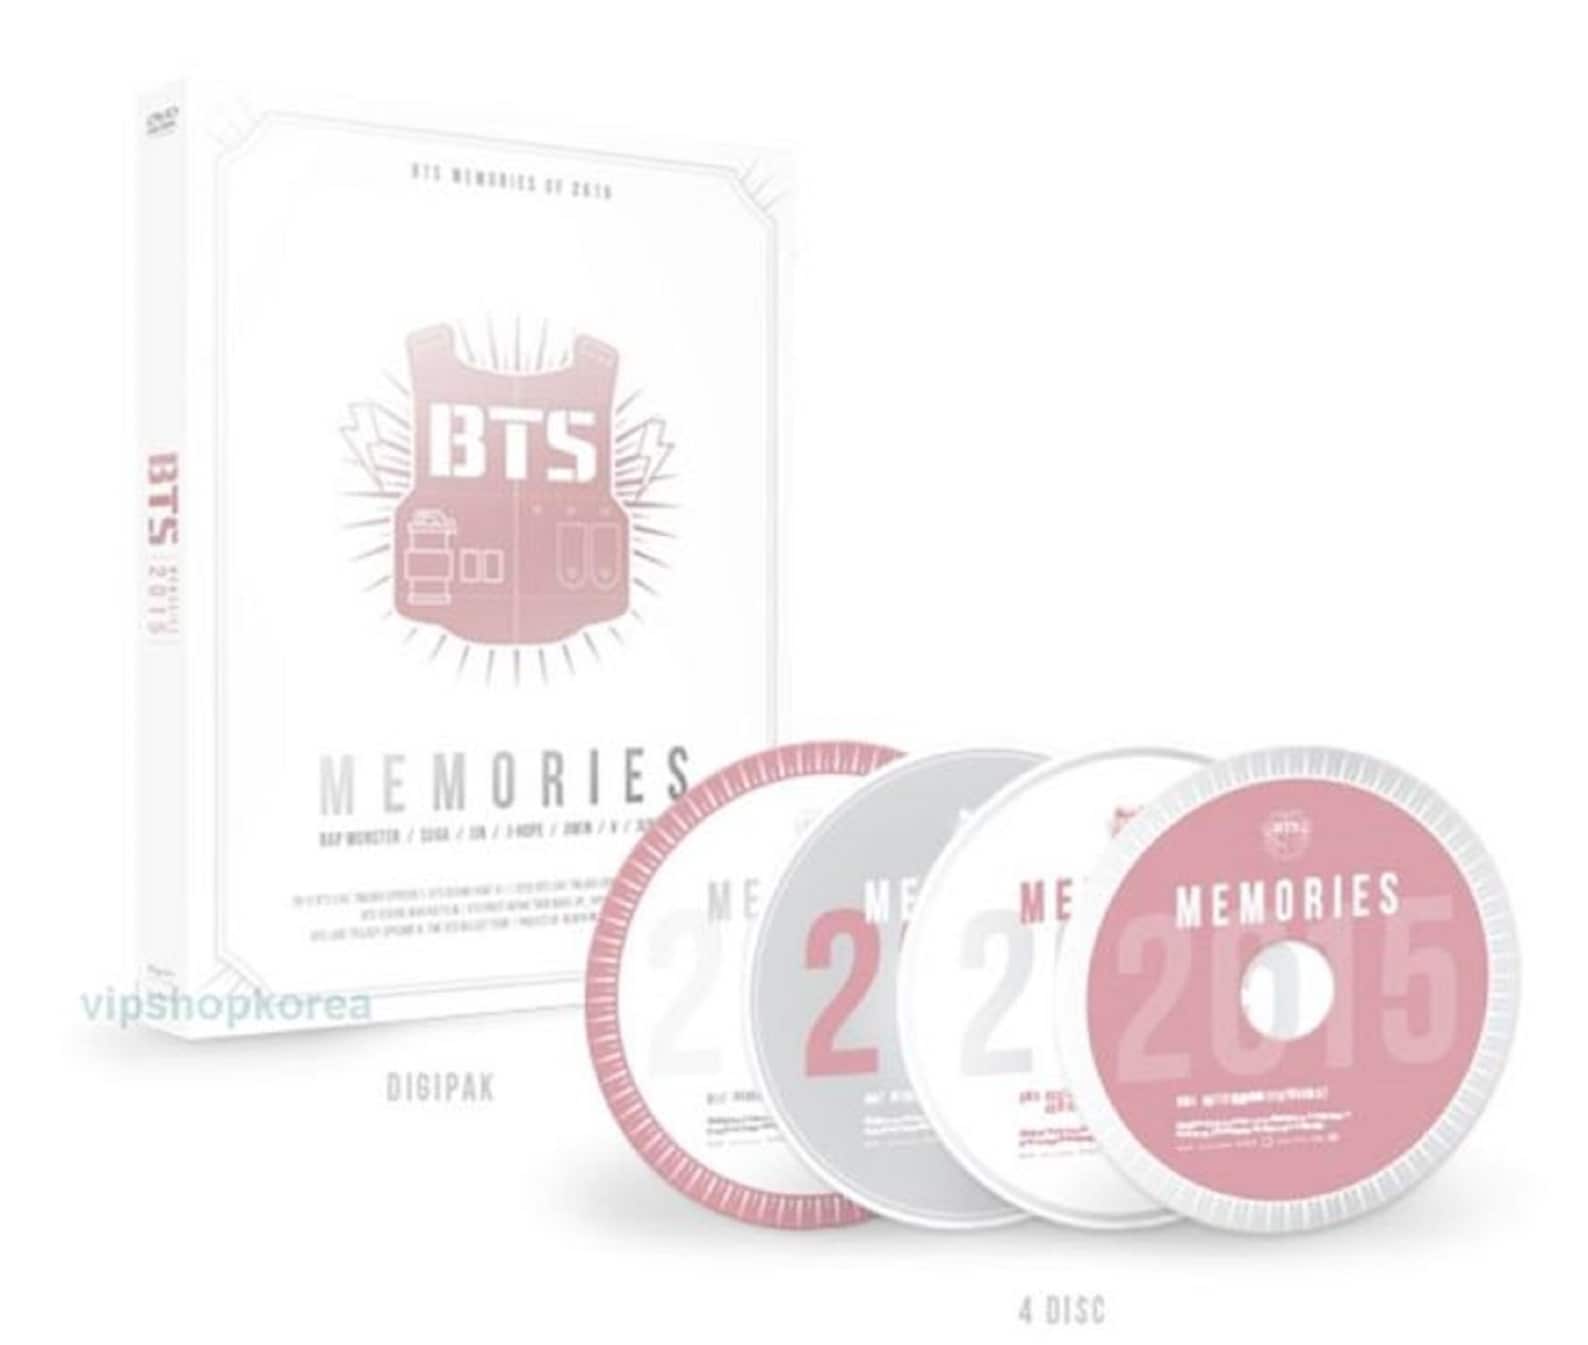 BTS Memories of 2015 DVD 4 DISK Edition Kpop Tracking Number - Etsy